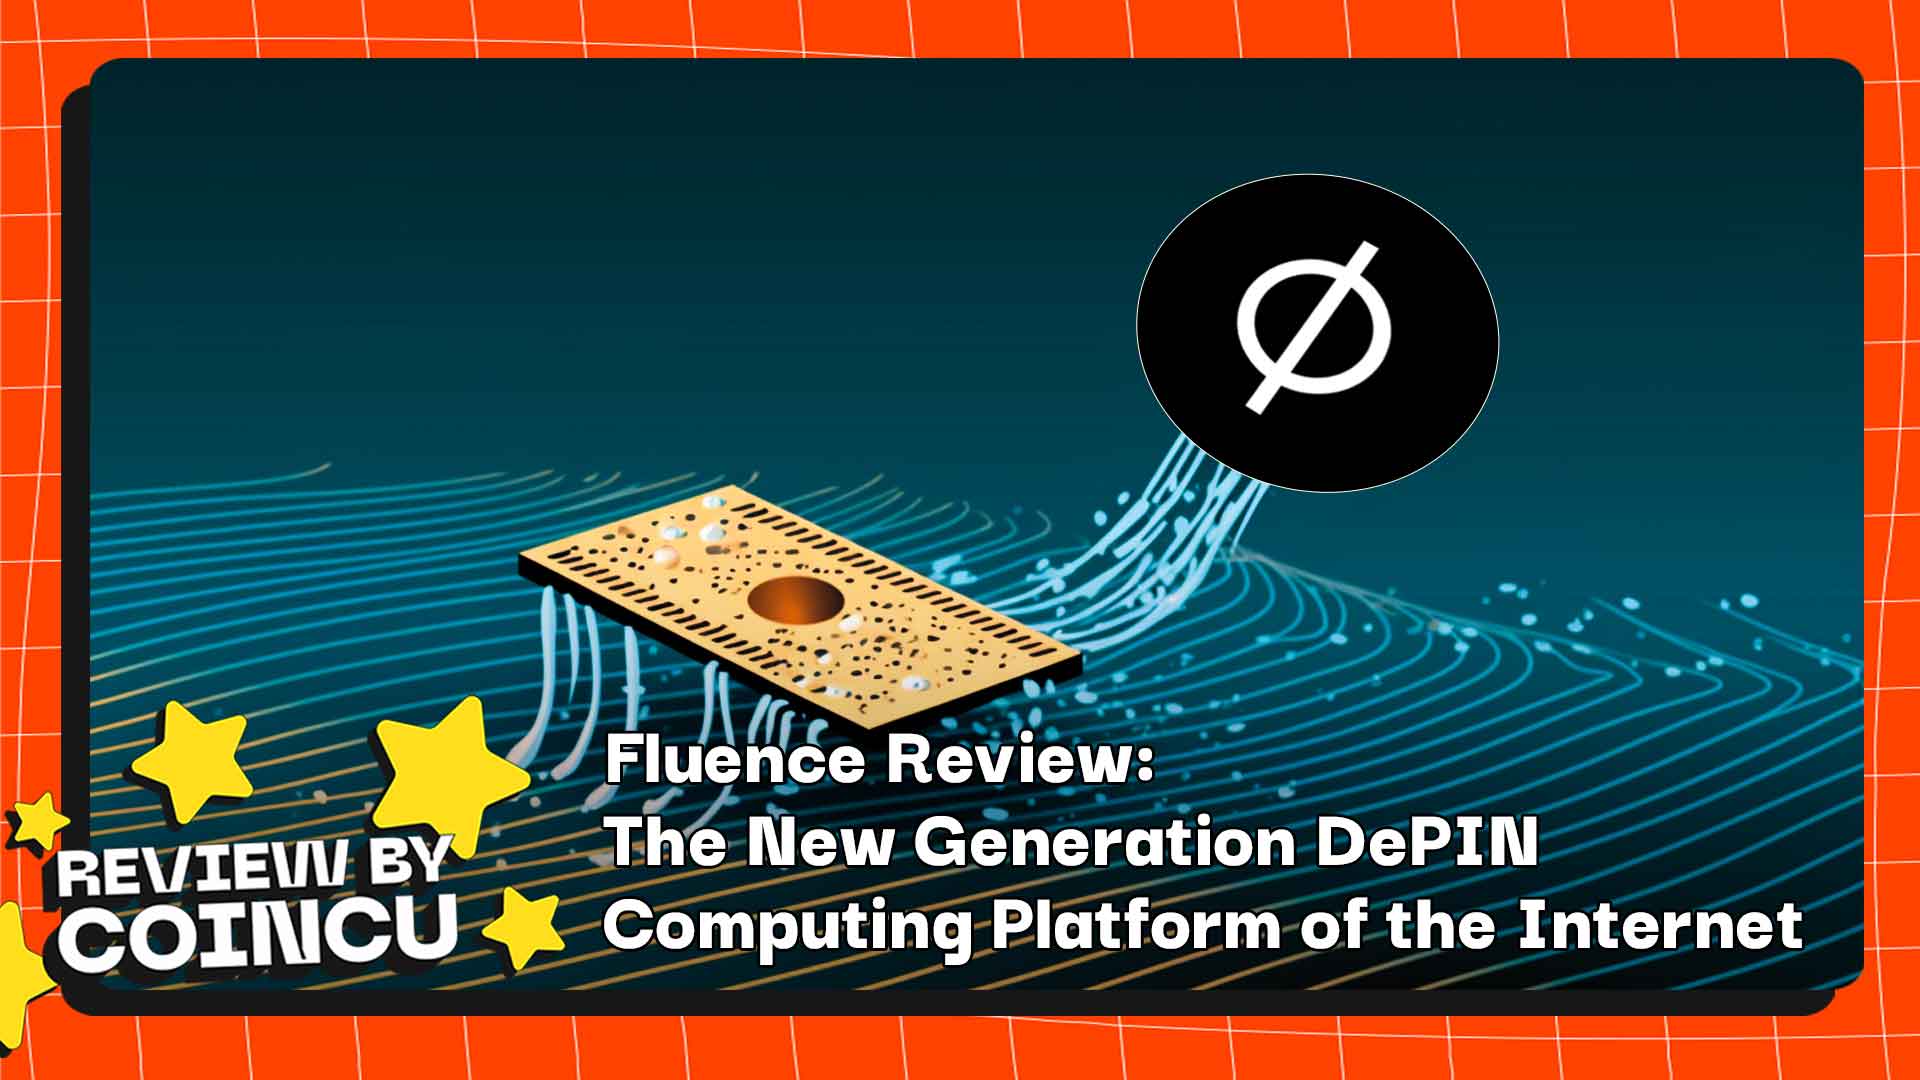 Fluence Review: The New Generation DePIN Computing Platform of the Internet